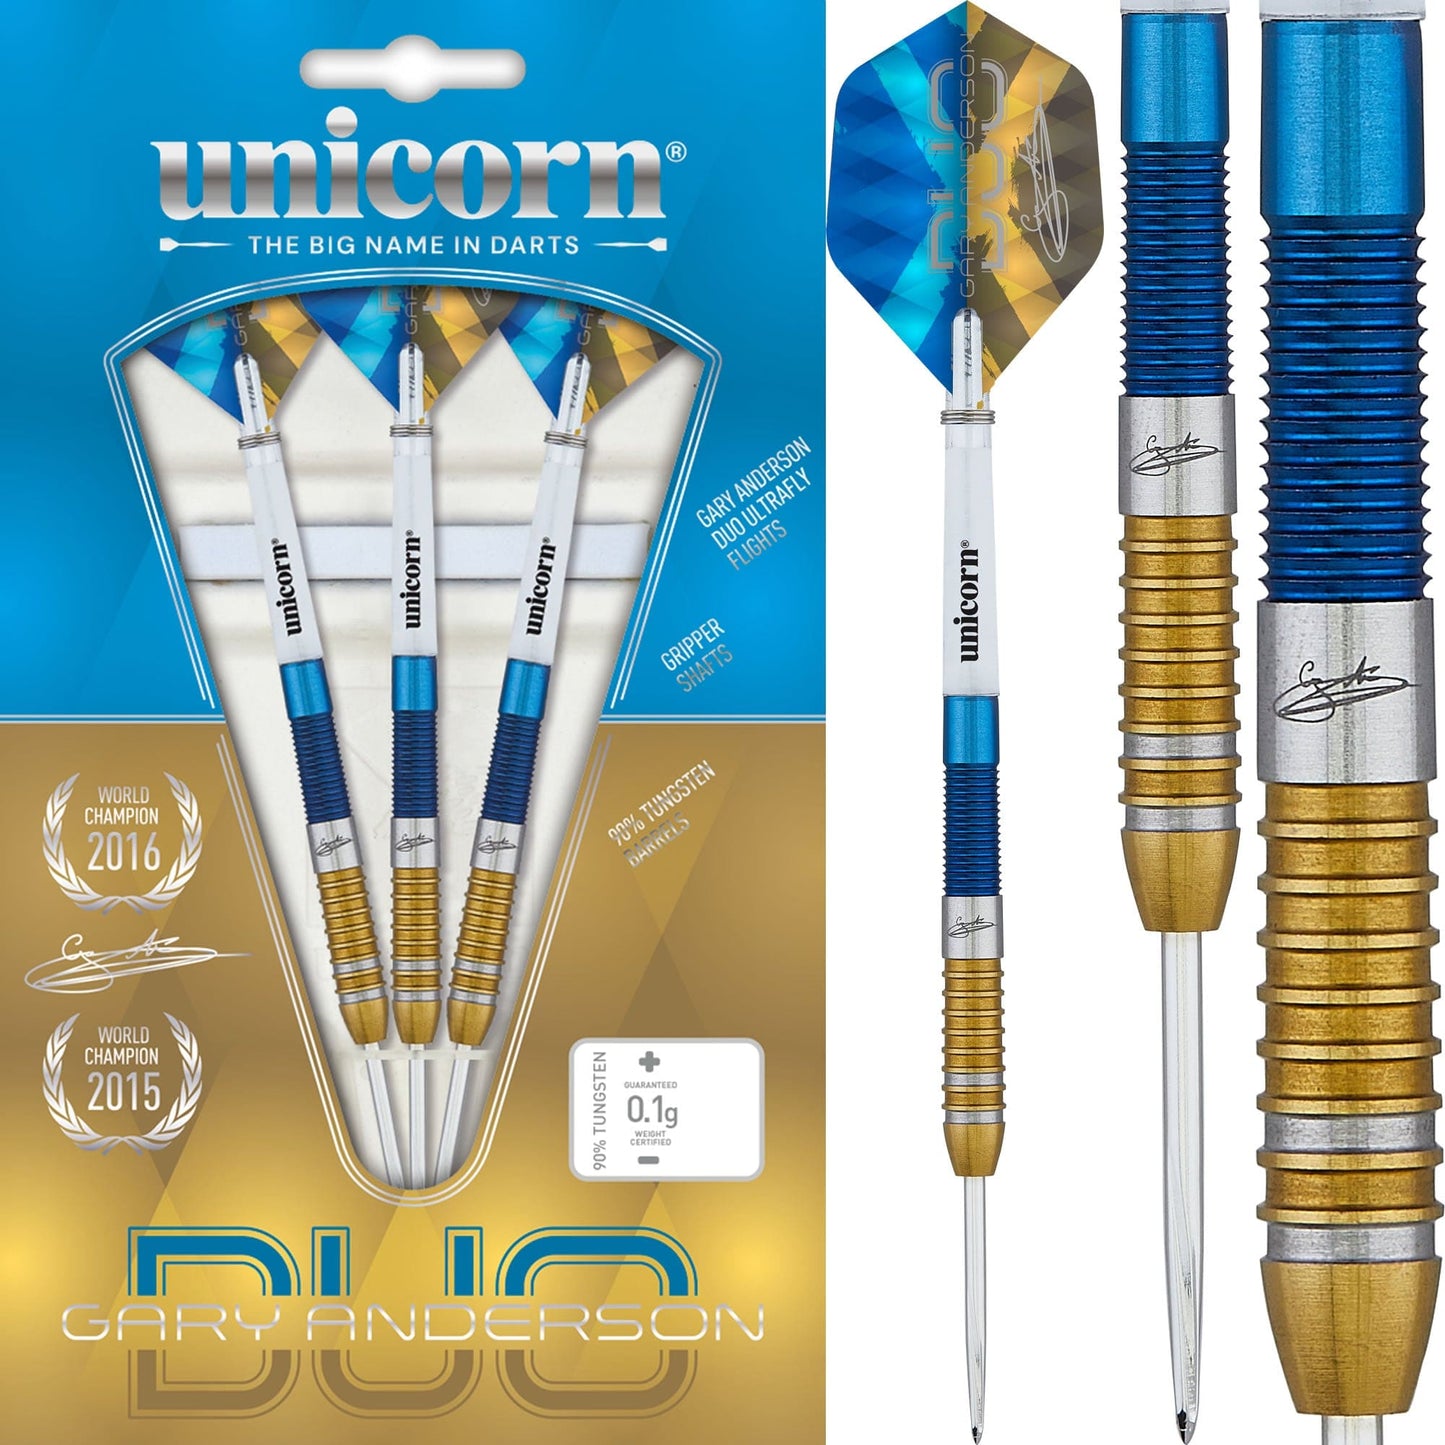 Unicorn Gary Anderson Darts - Steel Tip - The Flying Scotsman - Duo - Blue & Gold